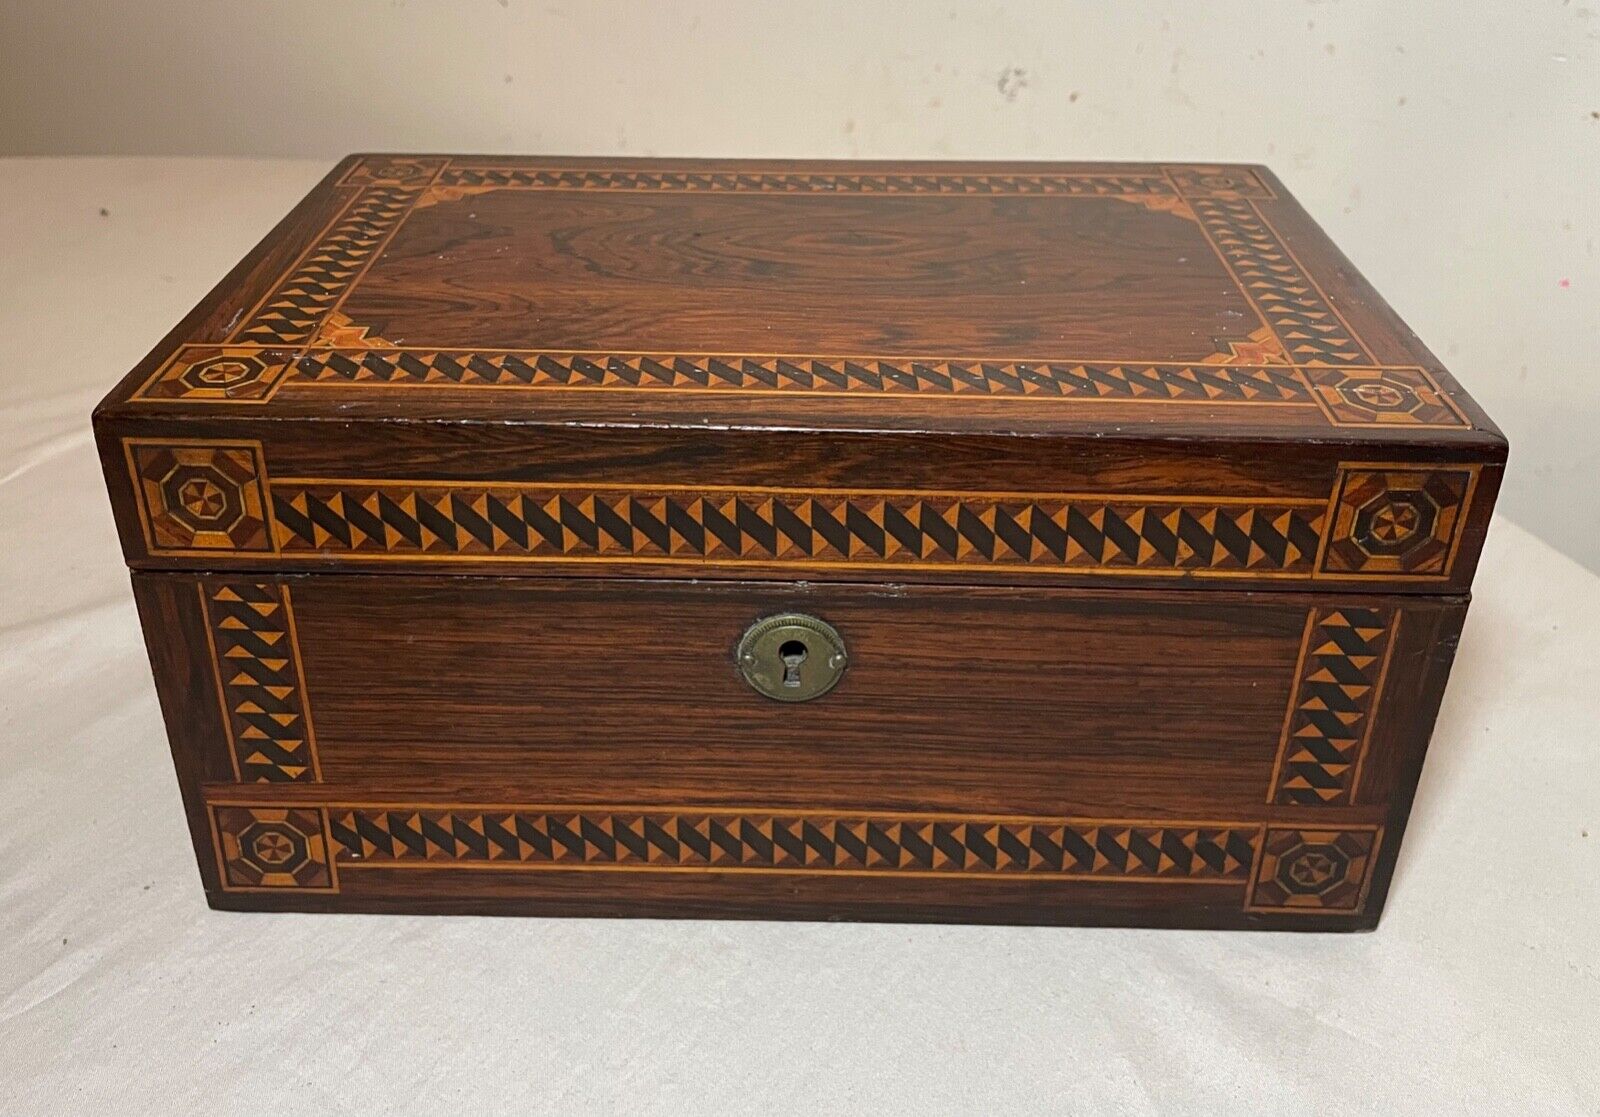 High quality 1800's antique handmade inlaid marquetry wood jewelry dresser box